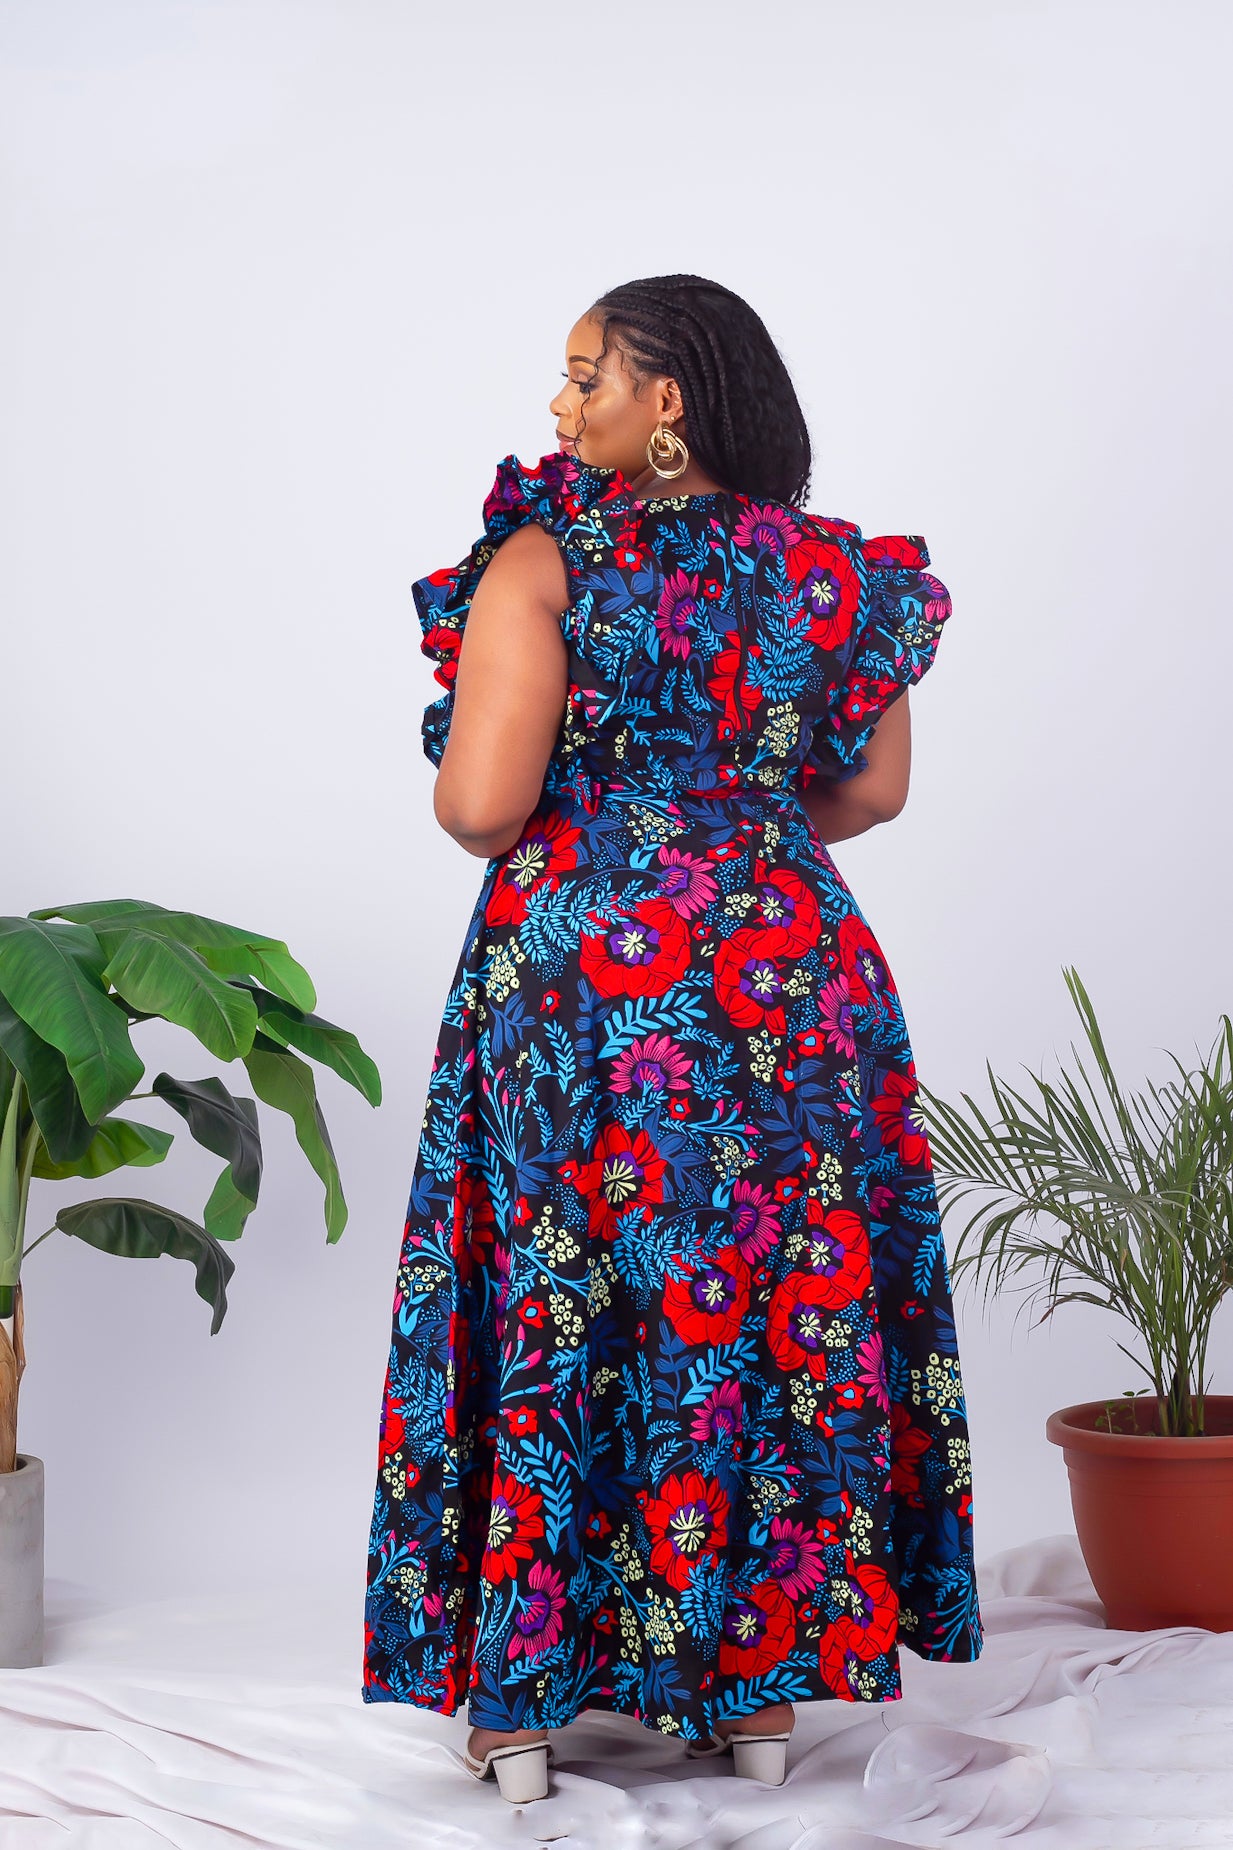 Show Stopper! African Ankara Dresses That Will Make You Stand Out •  Exquisite Magazine - Fashion, Beauty And Lifestyle